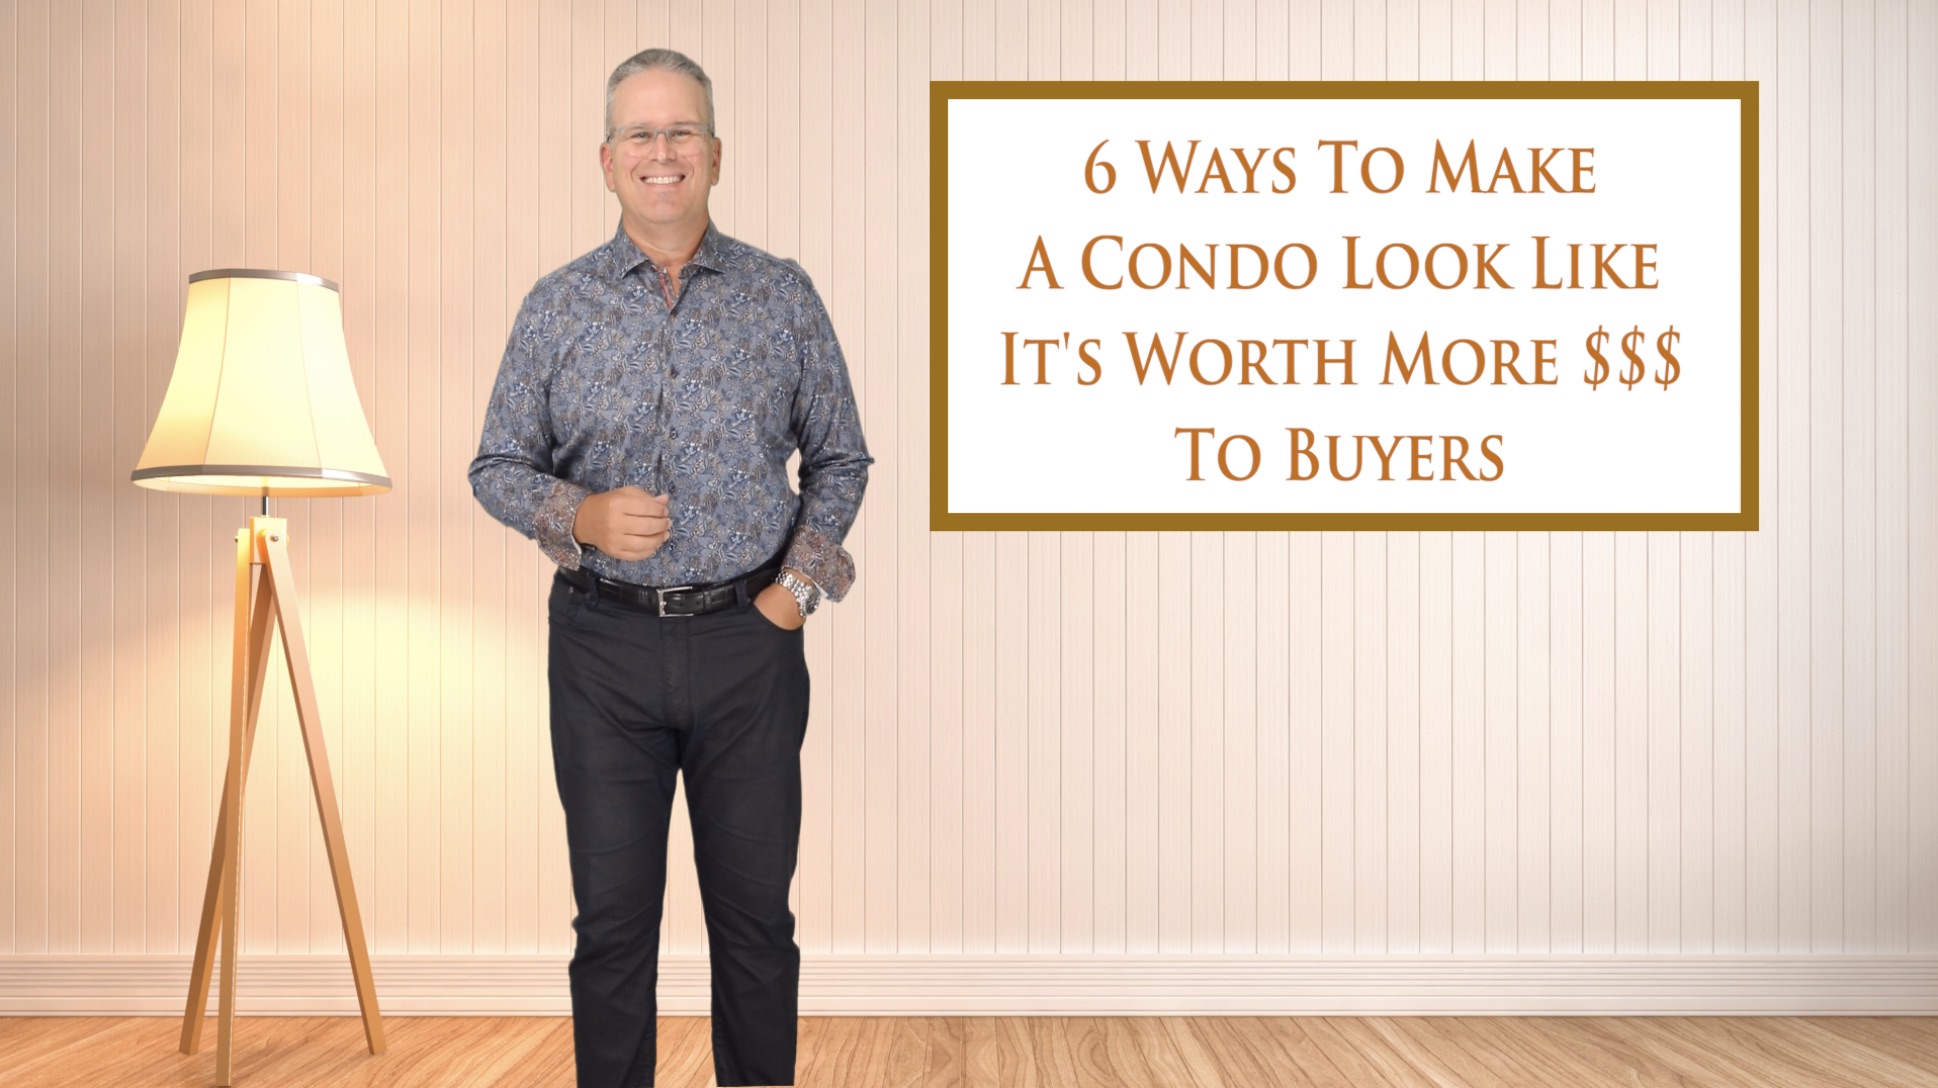 Six (6) Ways To Make a Condo Look Like It’s Worth More To Buyers